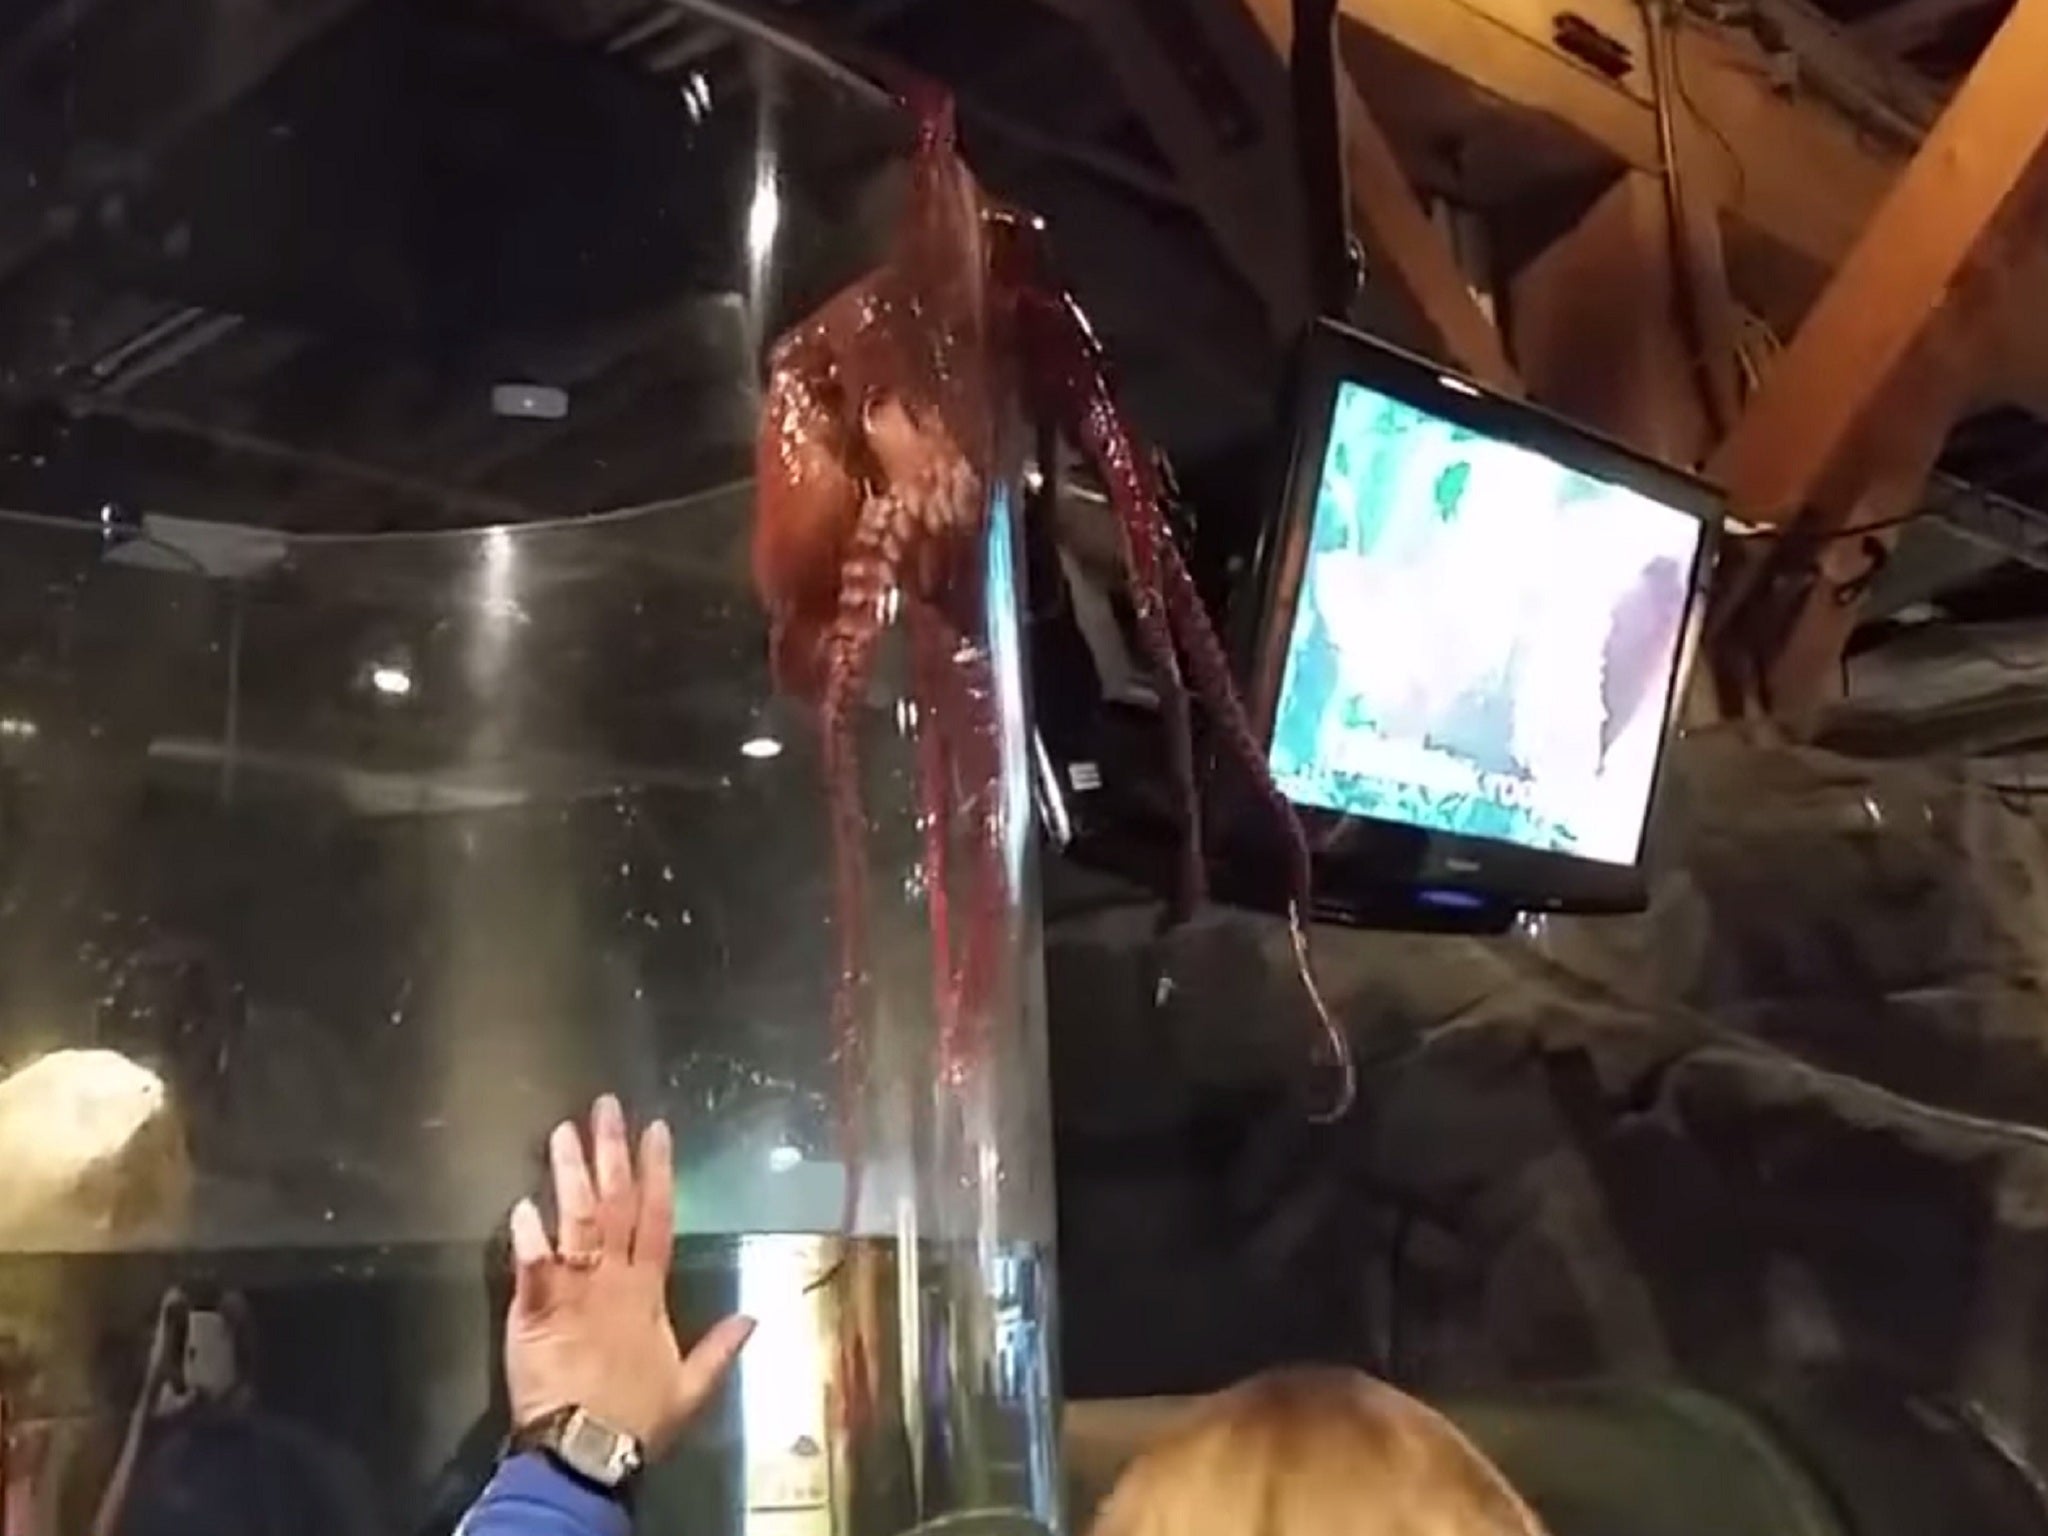 The Giant Pacific octopus inches its way over the glass enclosure